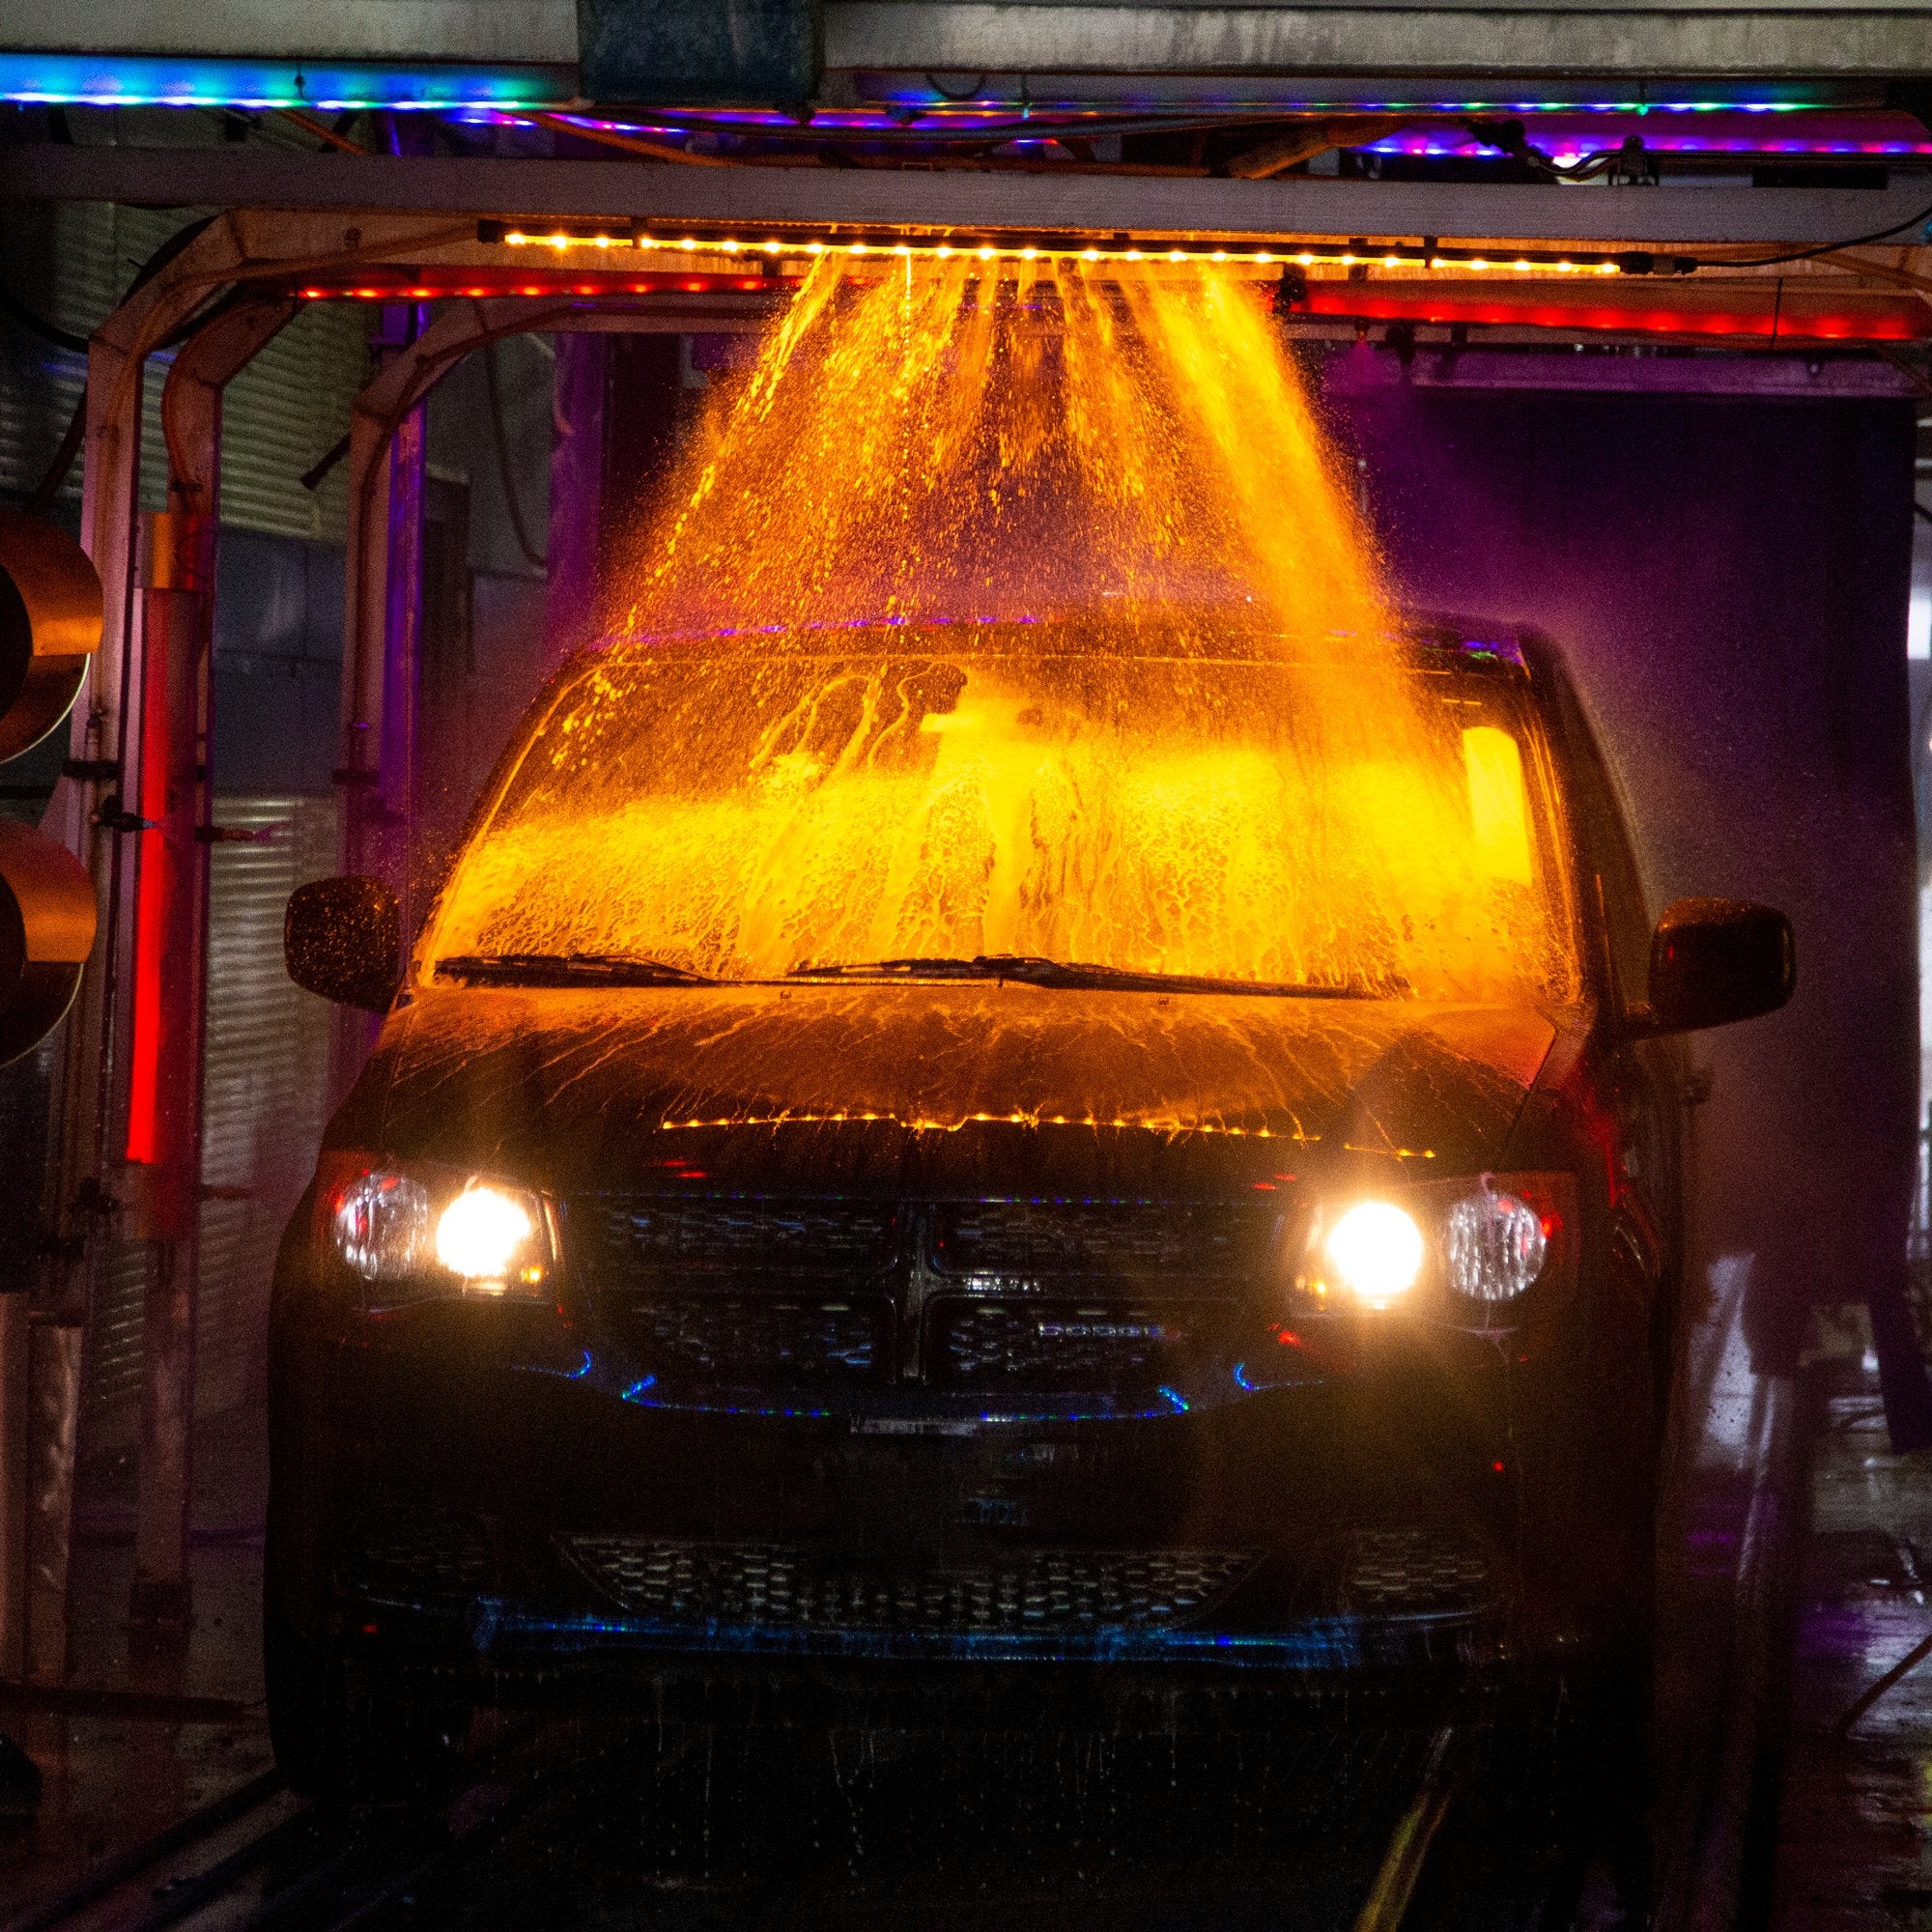 Give your car the love it deserves with Delta Sonic’s safe, gentle, state-of-the-art car wash.